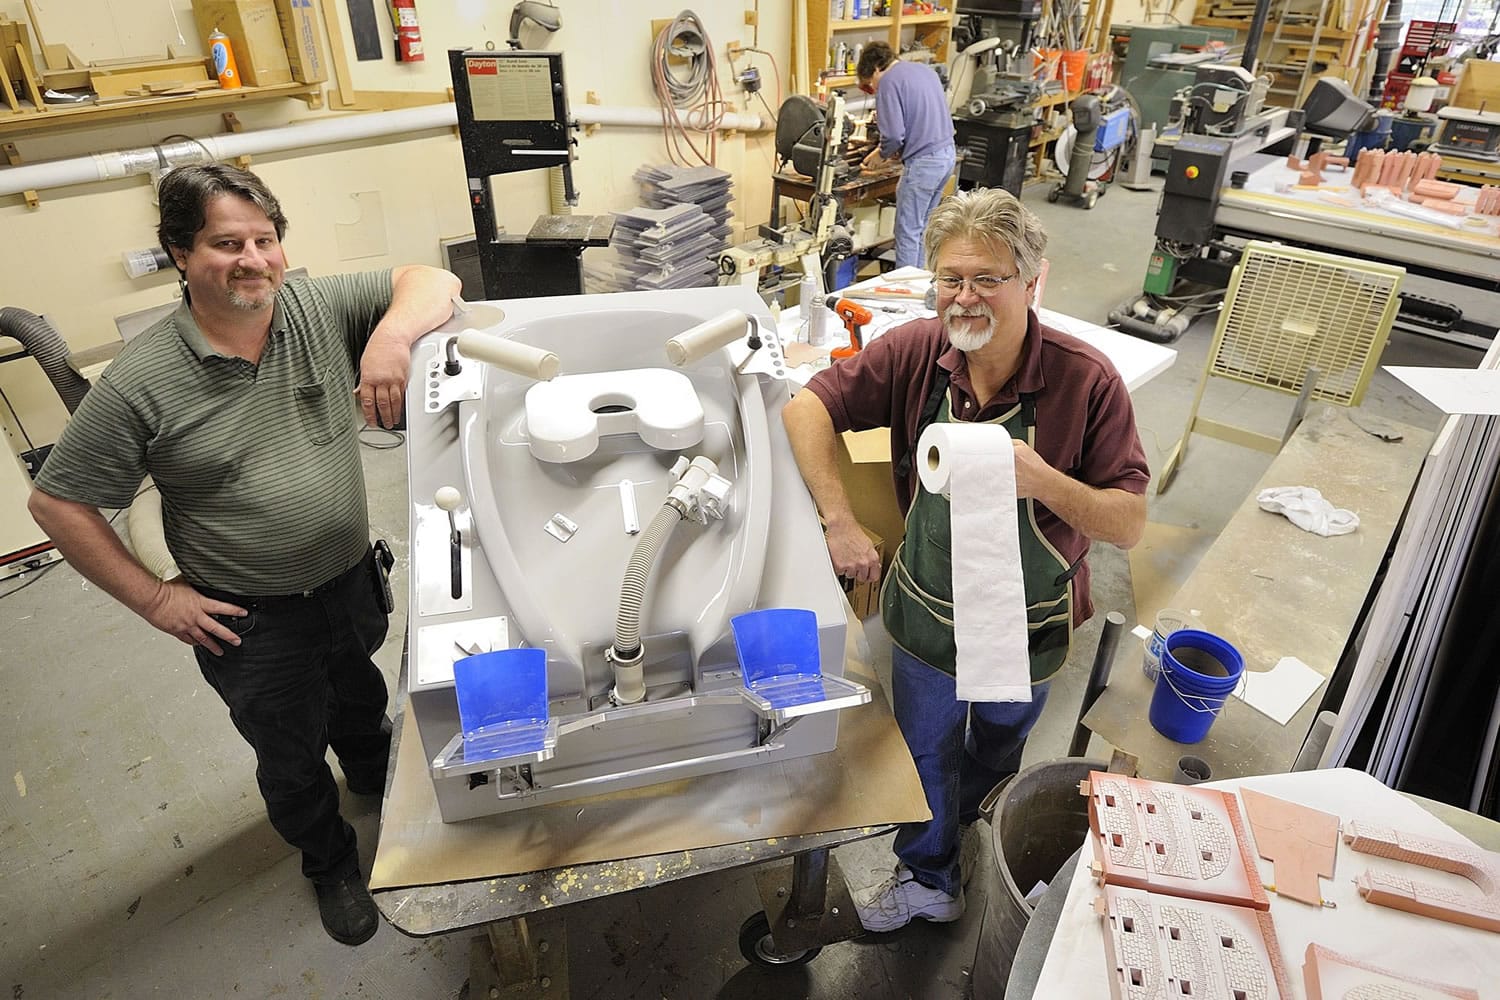 John Geigle, CEO of Masterpiece Models, and Ed Warmack, a fabricator at the company who helped build the space toilet, stand next to a full-size replica space shuttle toilet created for a museum in Kansas. The museum says the No.